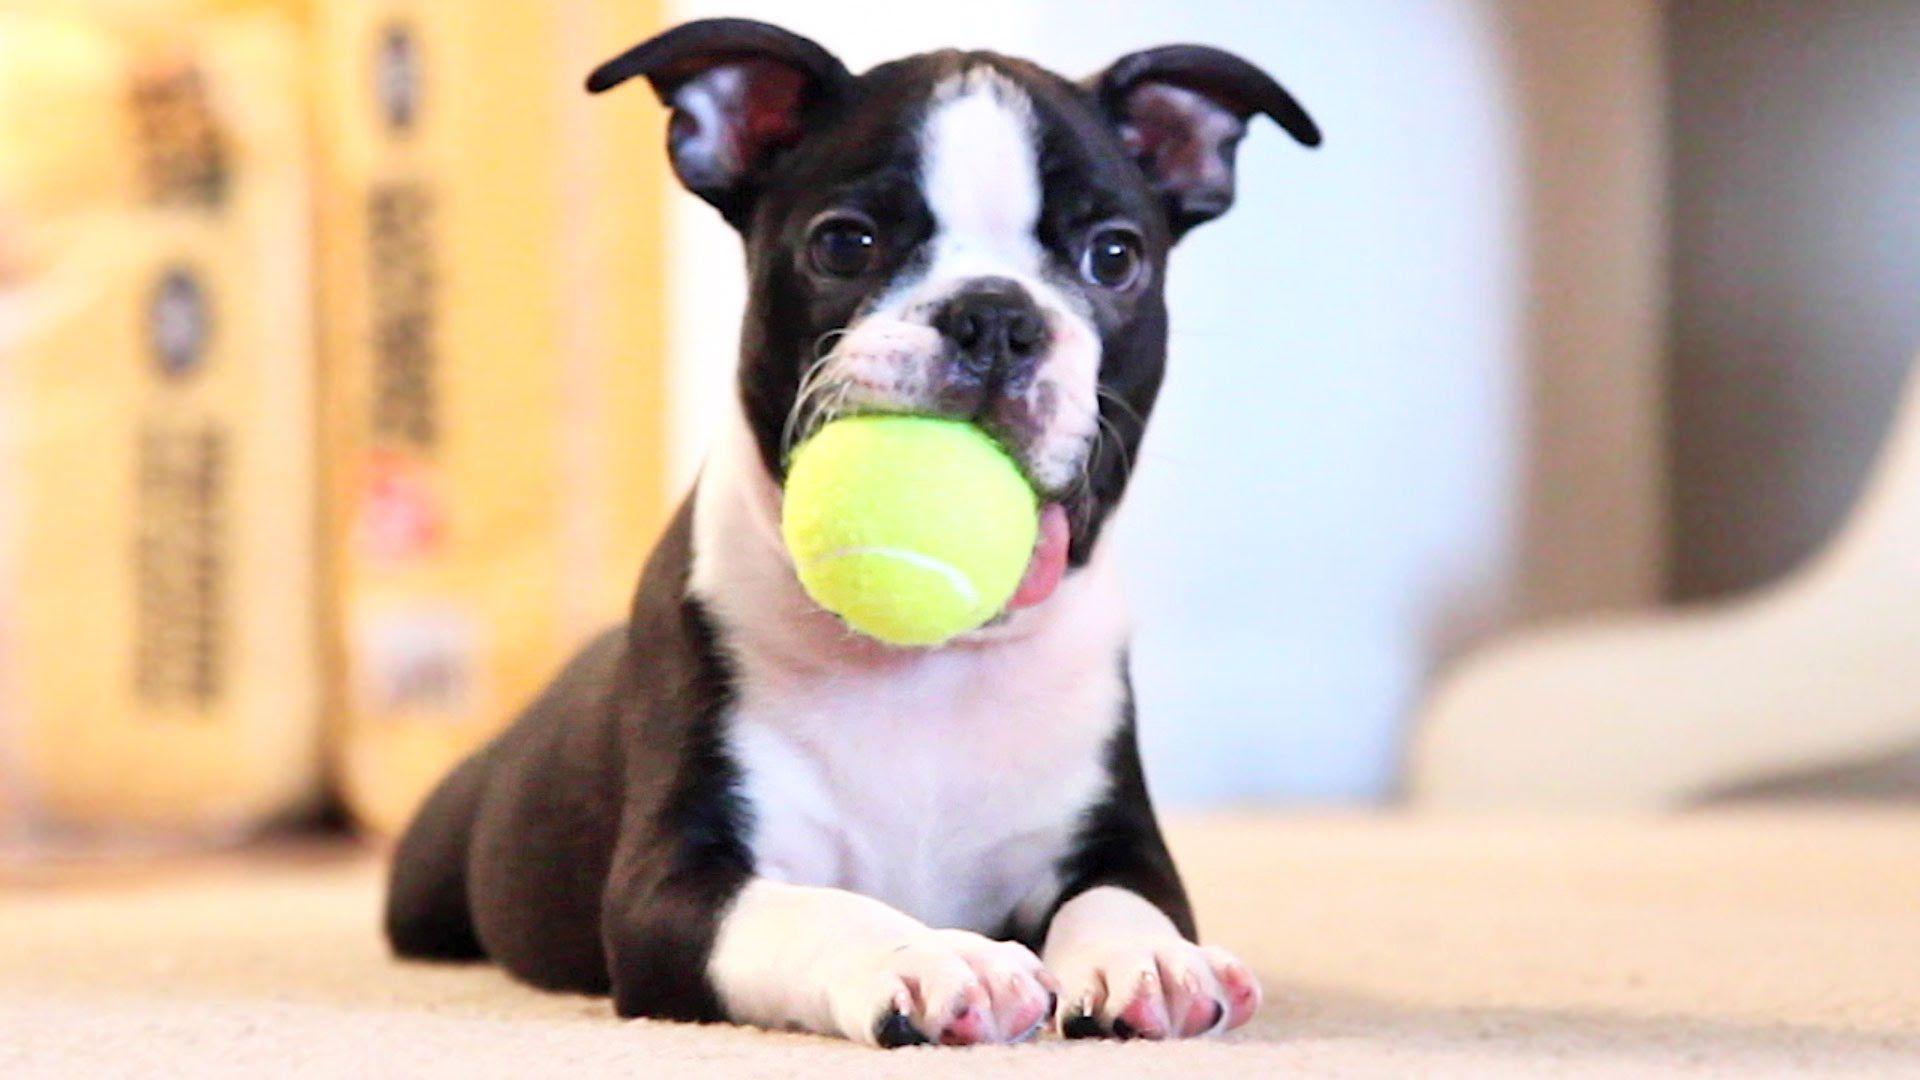 Boston Terrier Dogs Wallpapers - Wallpaper Cave